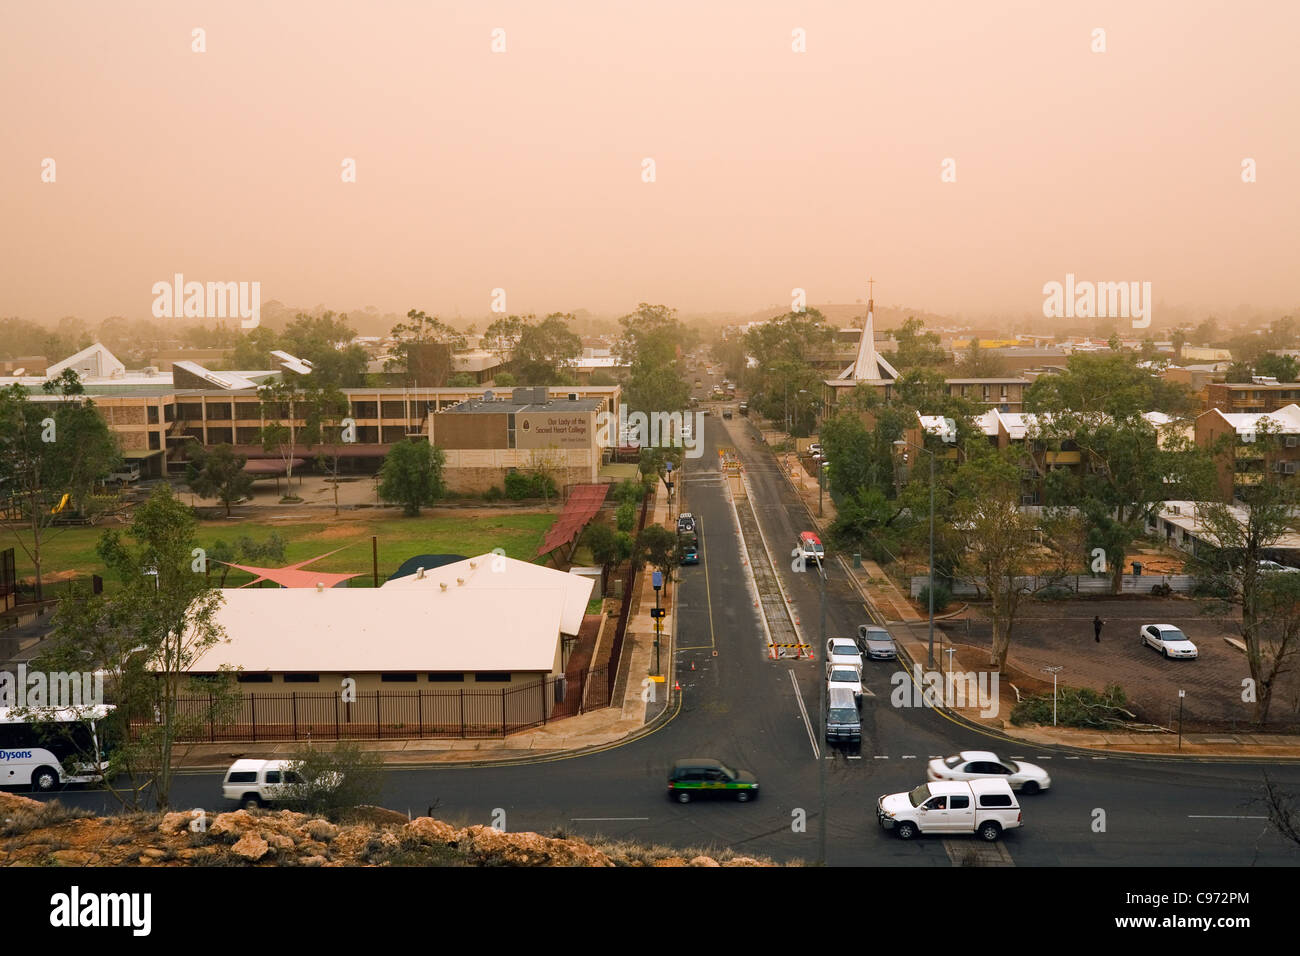 Dust storm passing over the desert town of Alice Springs, Northern Territory, Australia Stock Photo